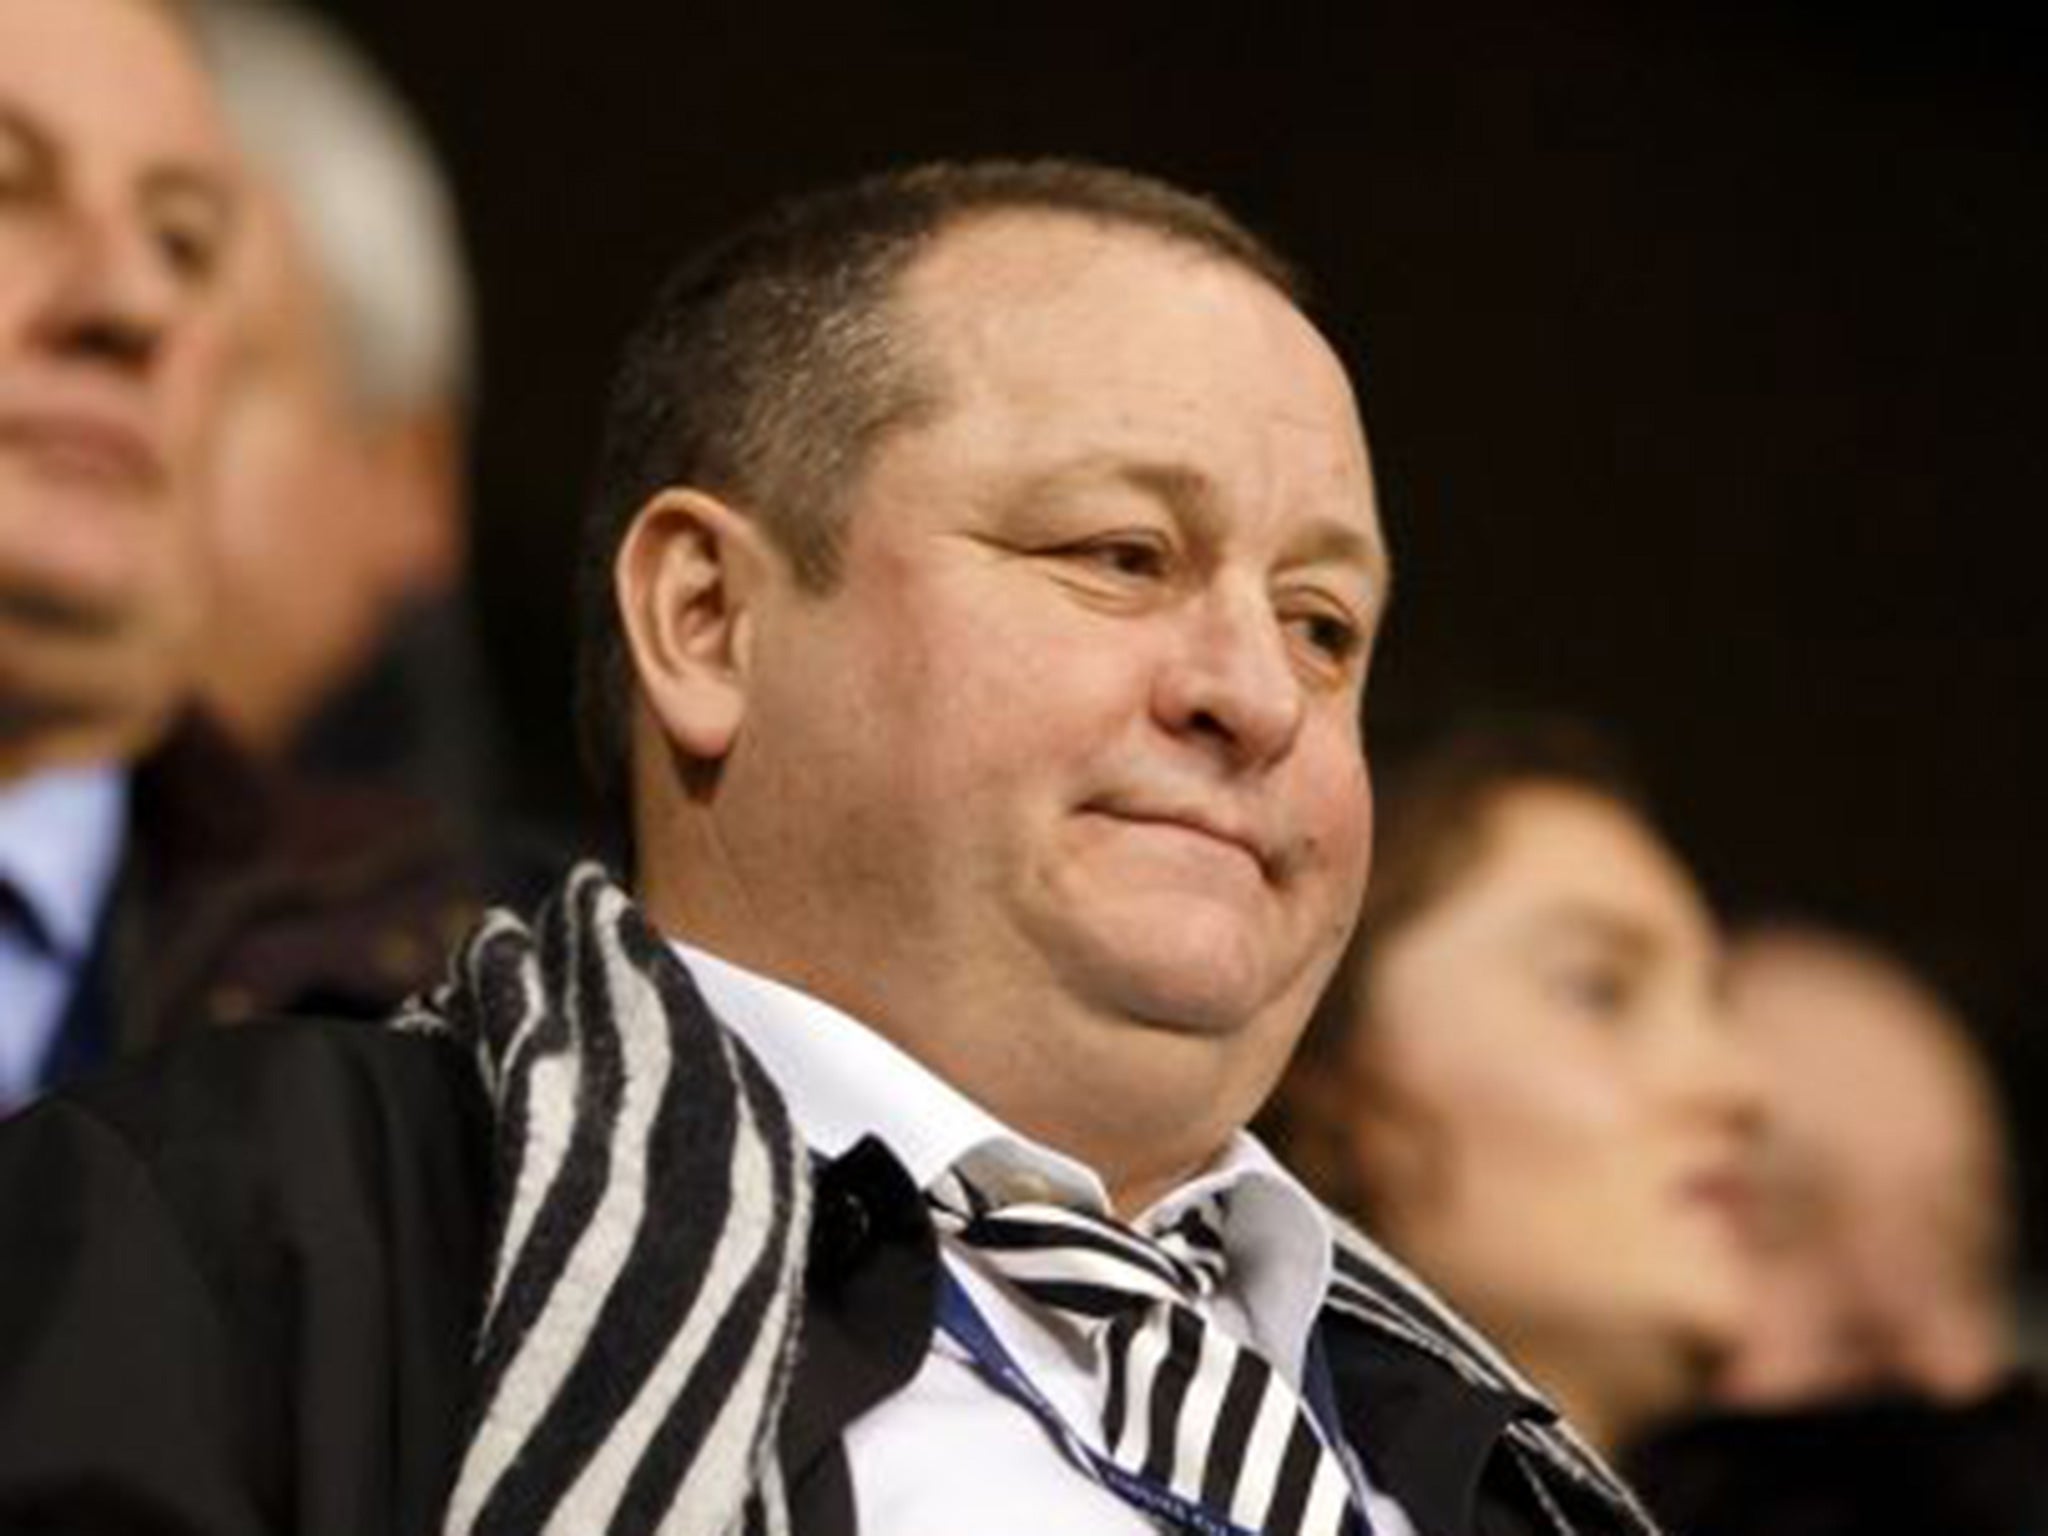 Mike Ashley has a 55 per cent stake in Sports Direct that has tumbled in value